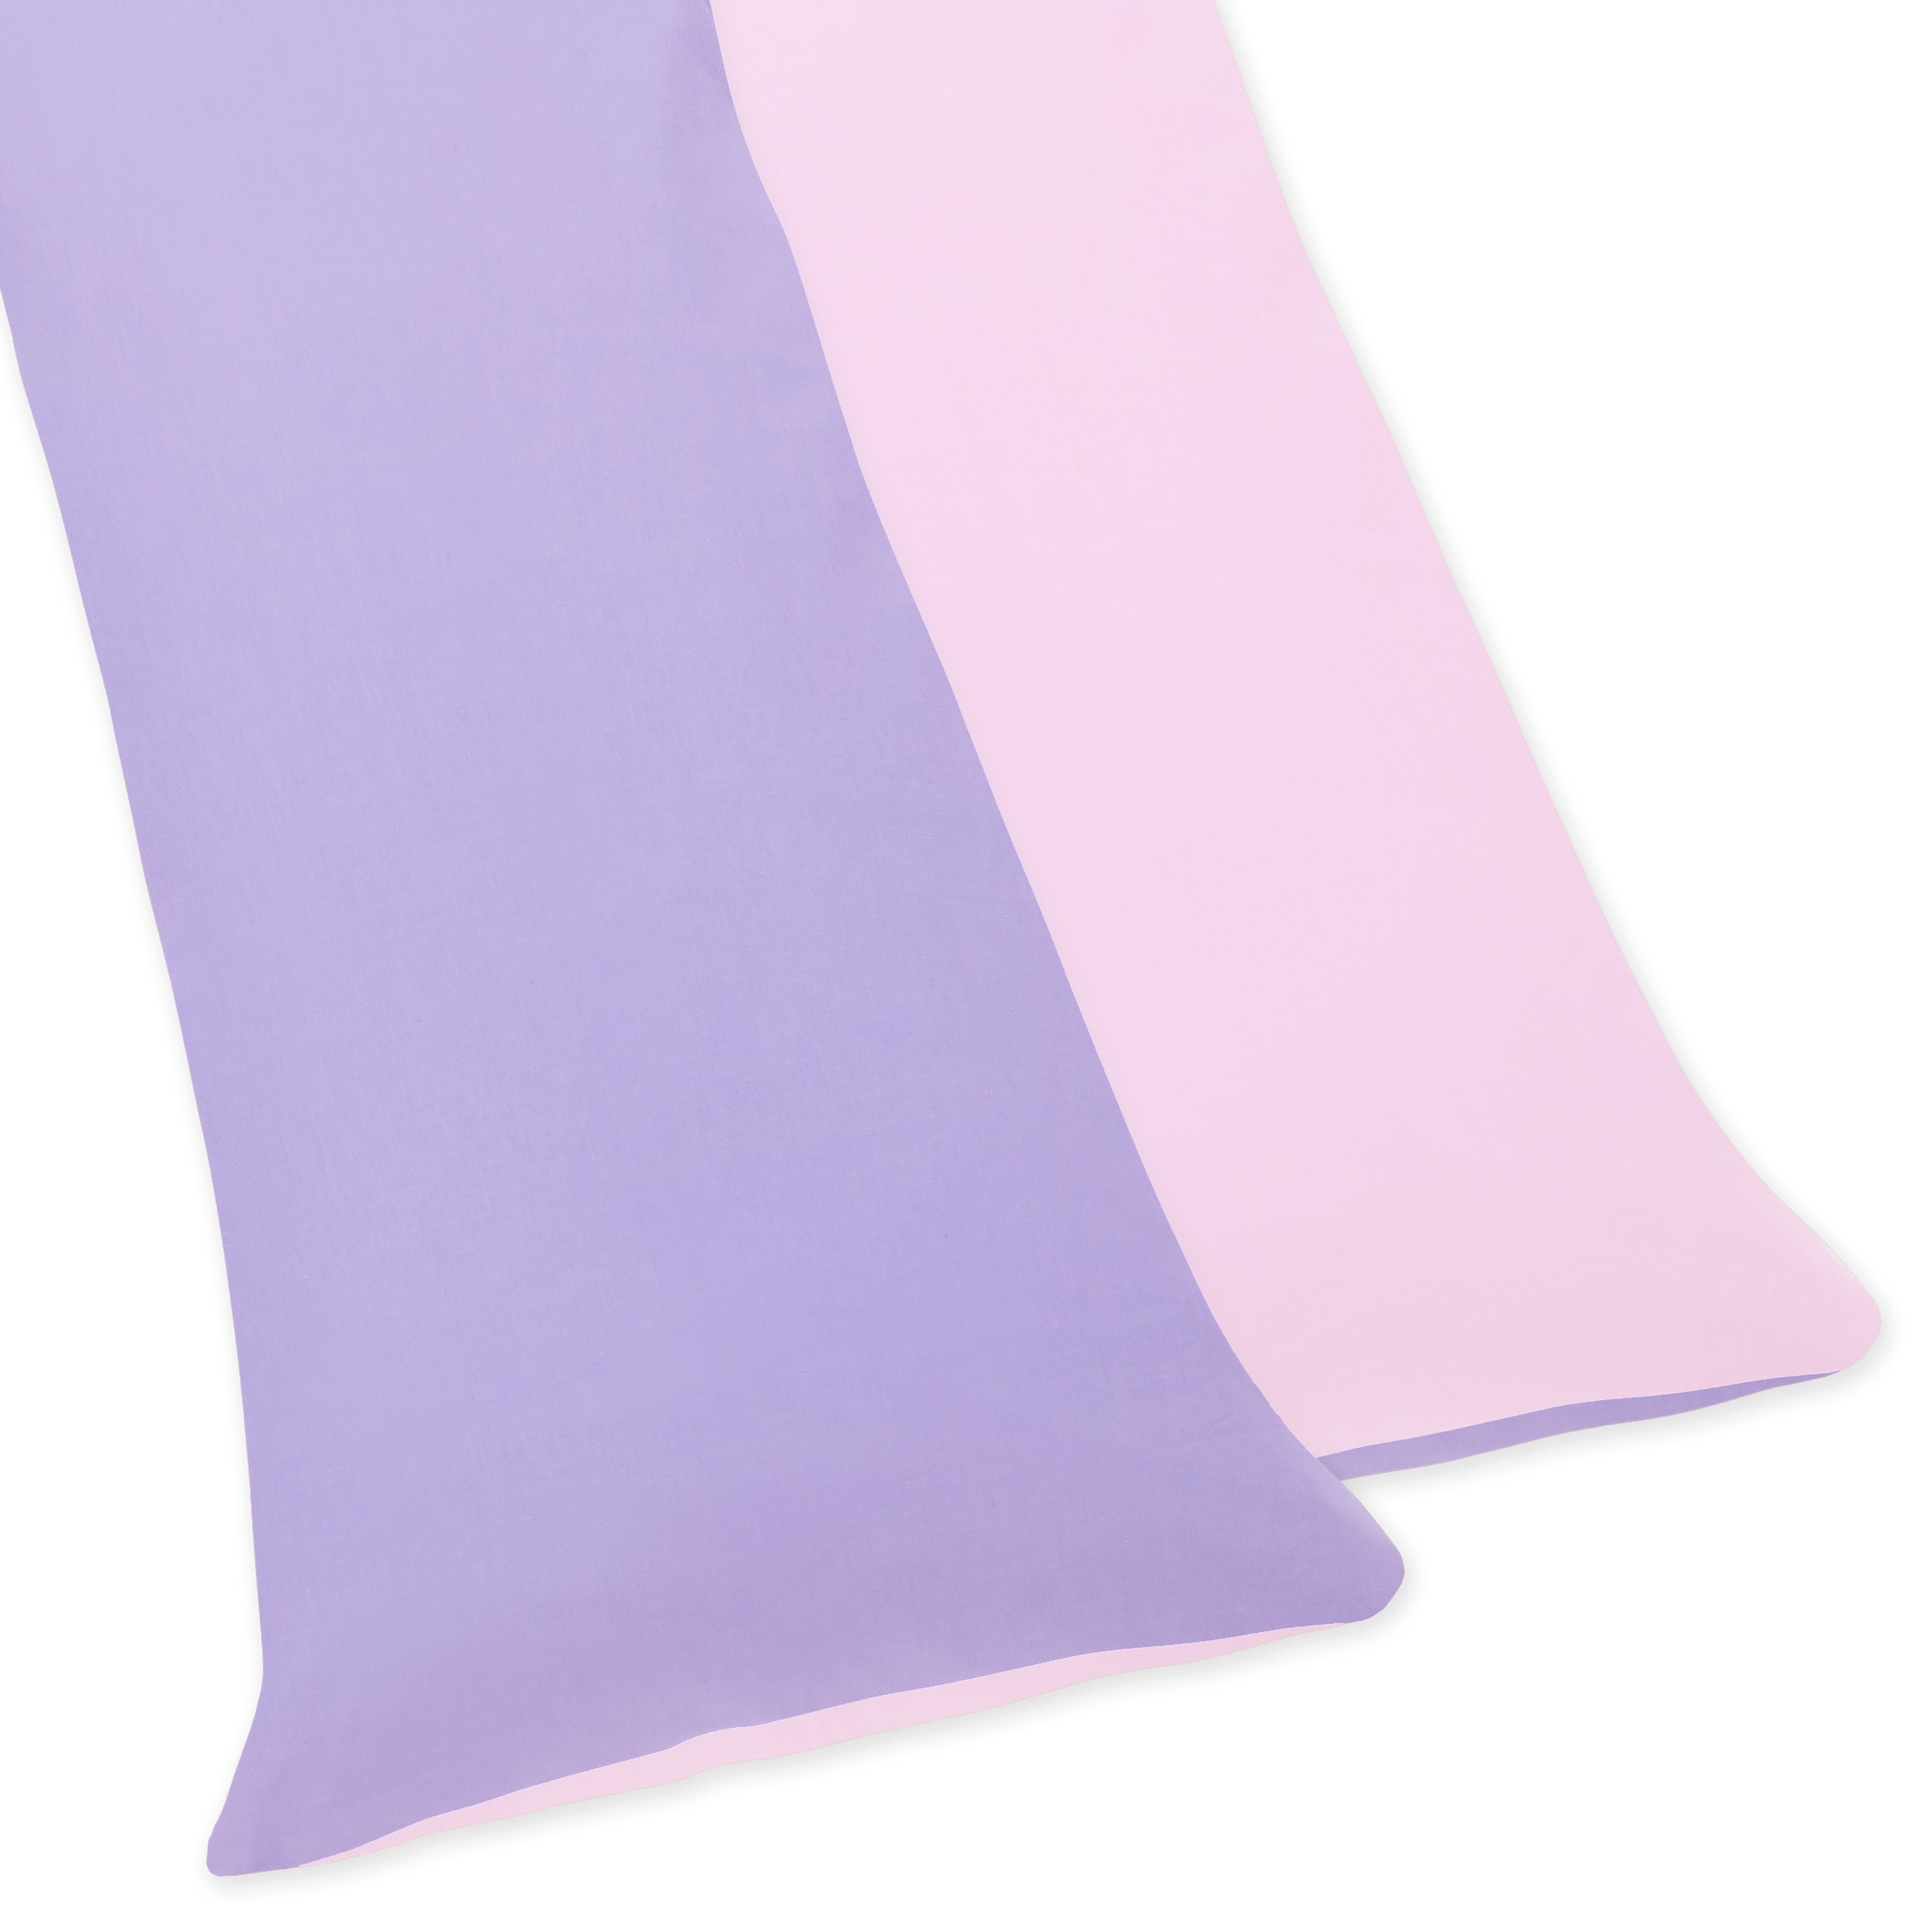 Sweet Jojo Designs Pink And Purple Butterfly Full Length Double Zippered Body Pillow Case Cover (Pink/ purpleThread count 200 Materials 100 percent cottonZipper closures on both sides for easy useCare instructions Machine washableDimensions 20 inches 